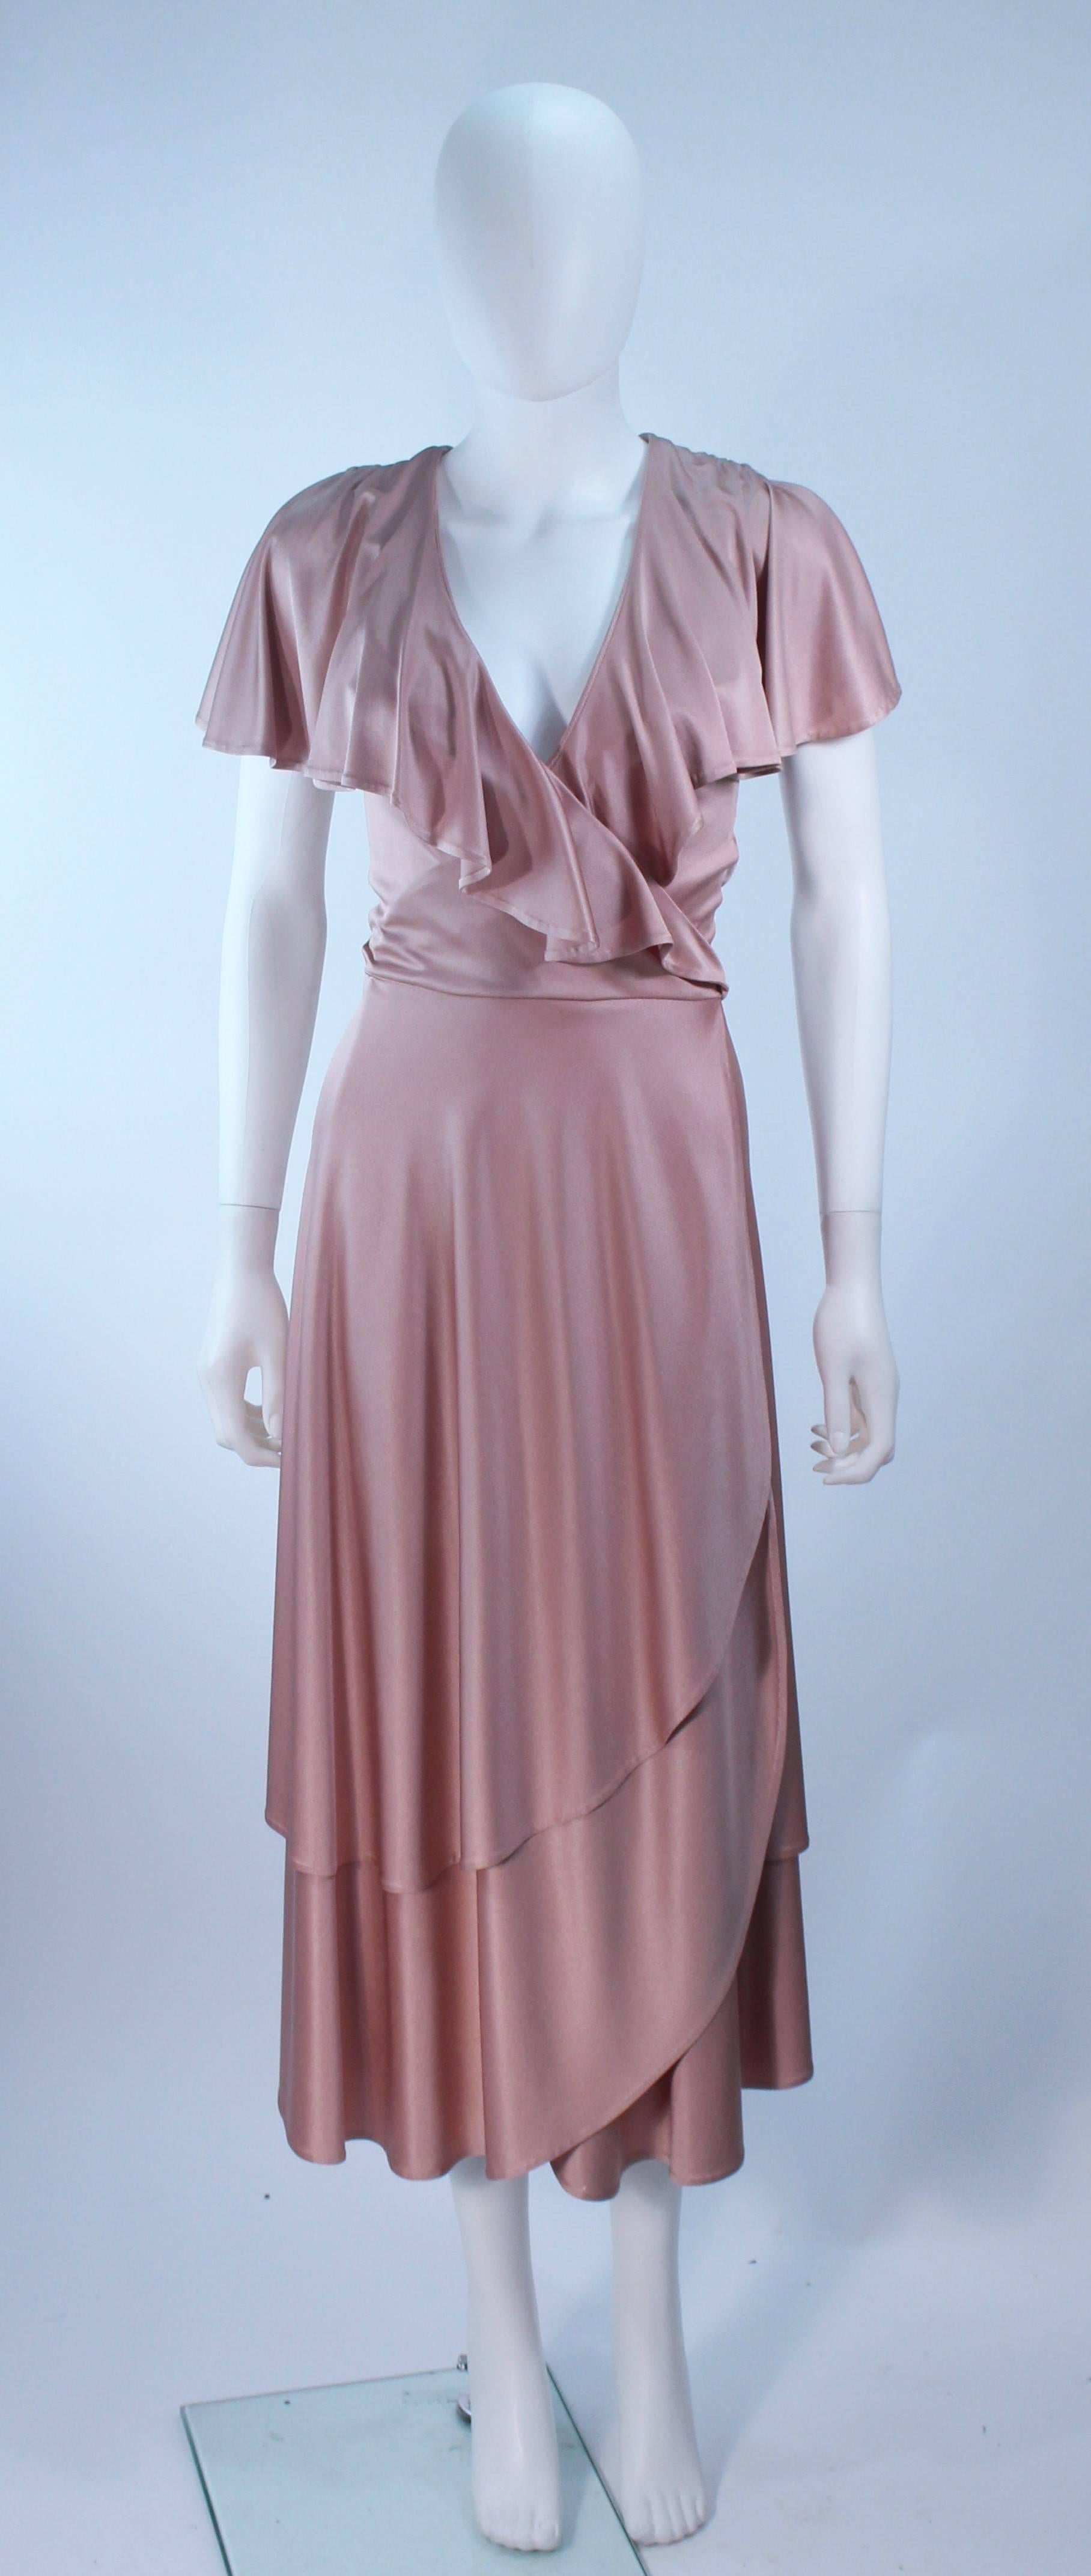 This Elizabeth Mason Couture 
This gown is composed of a pink mauve silk jersey ('Blush' hue) and features a draped ruffle design. This cocktail dress has a waist wrap. This effortlessly chic gown can be styled in a variety of fashions. Made in